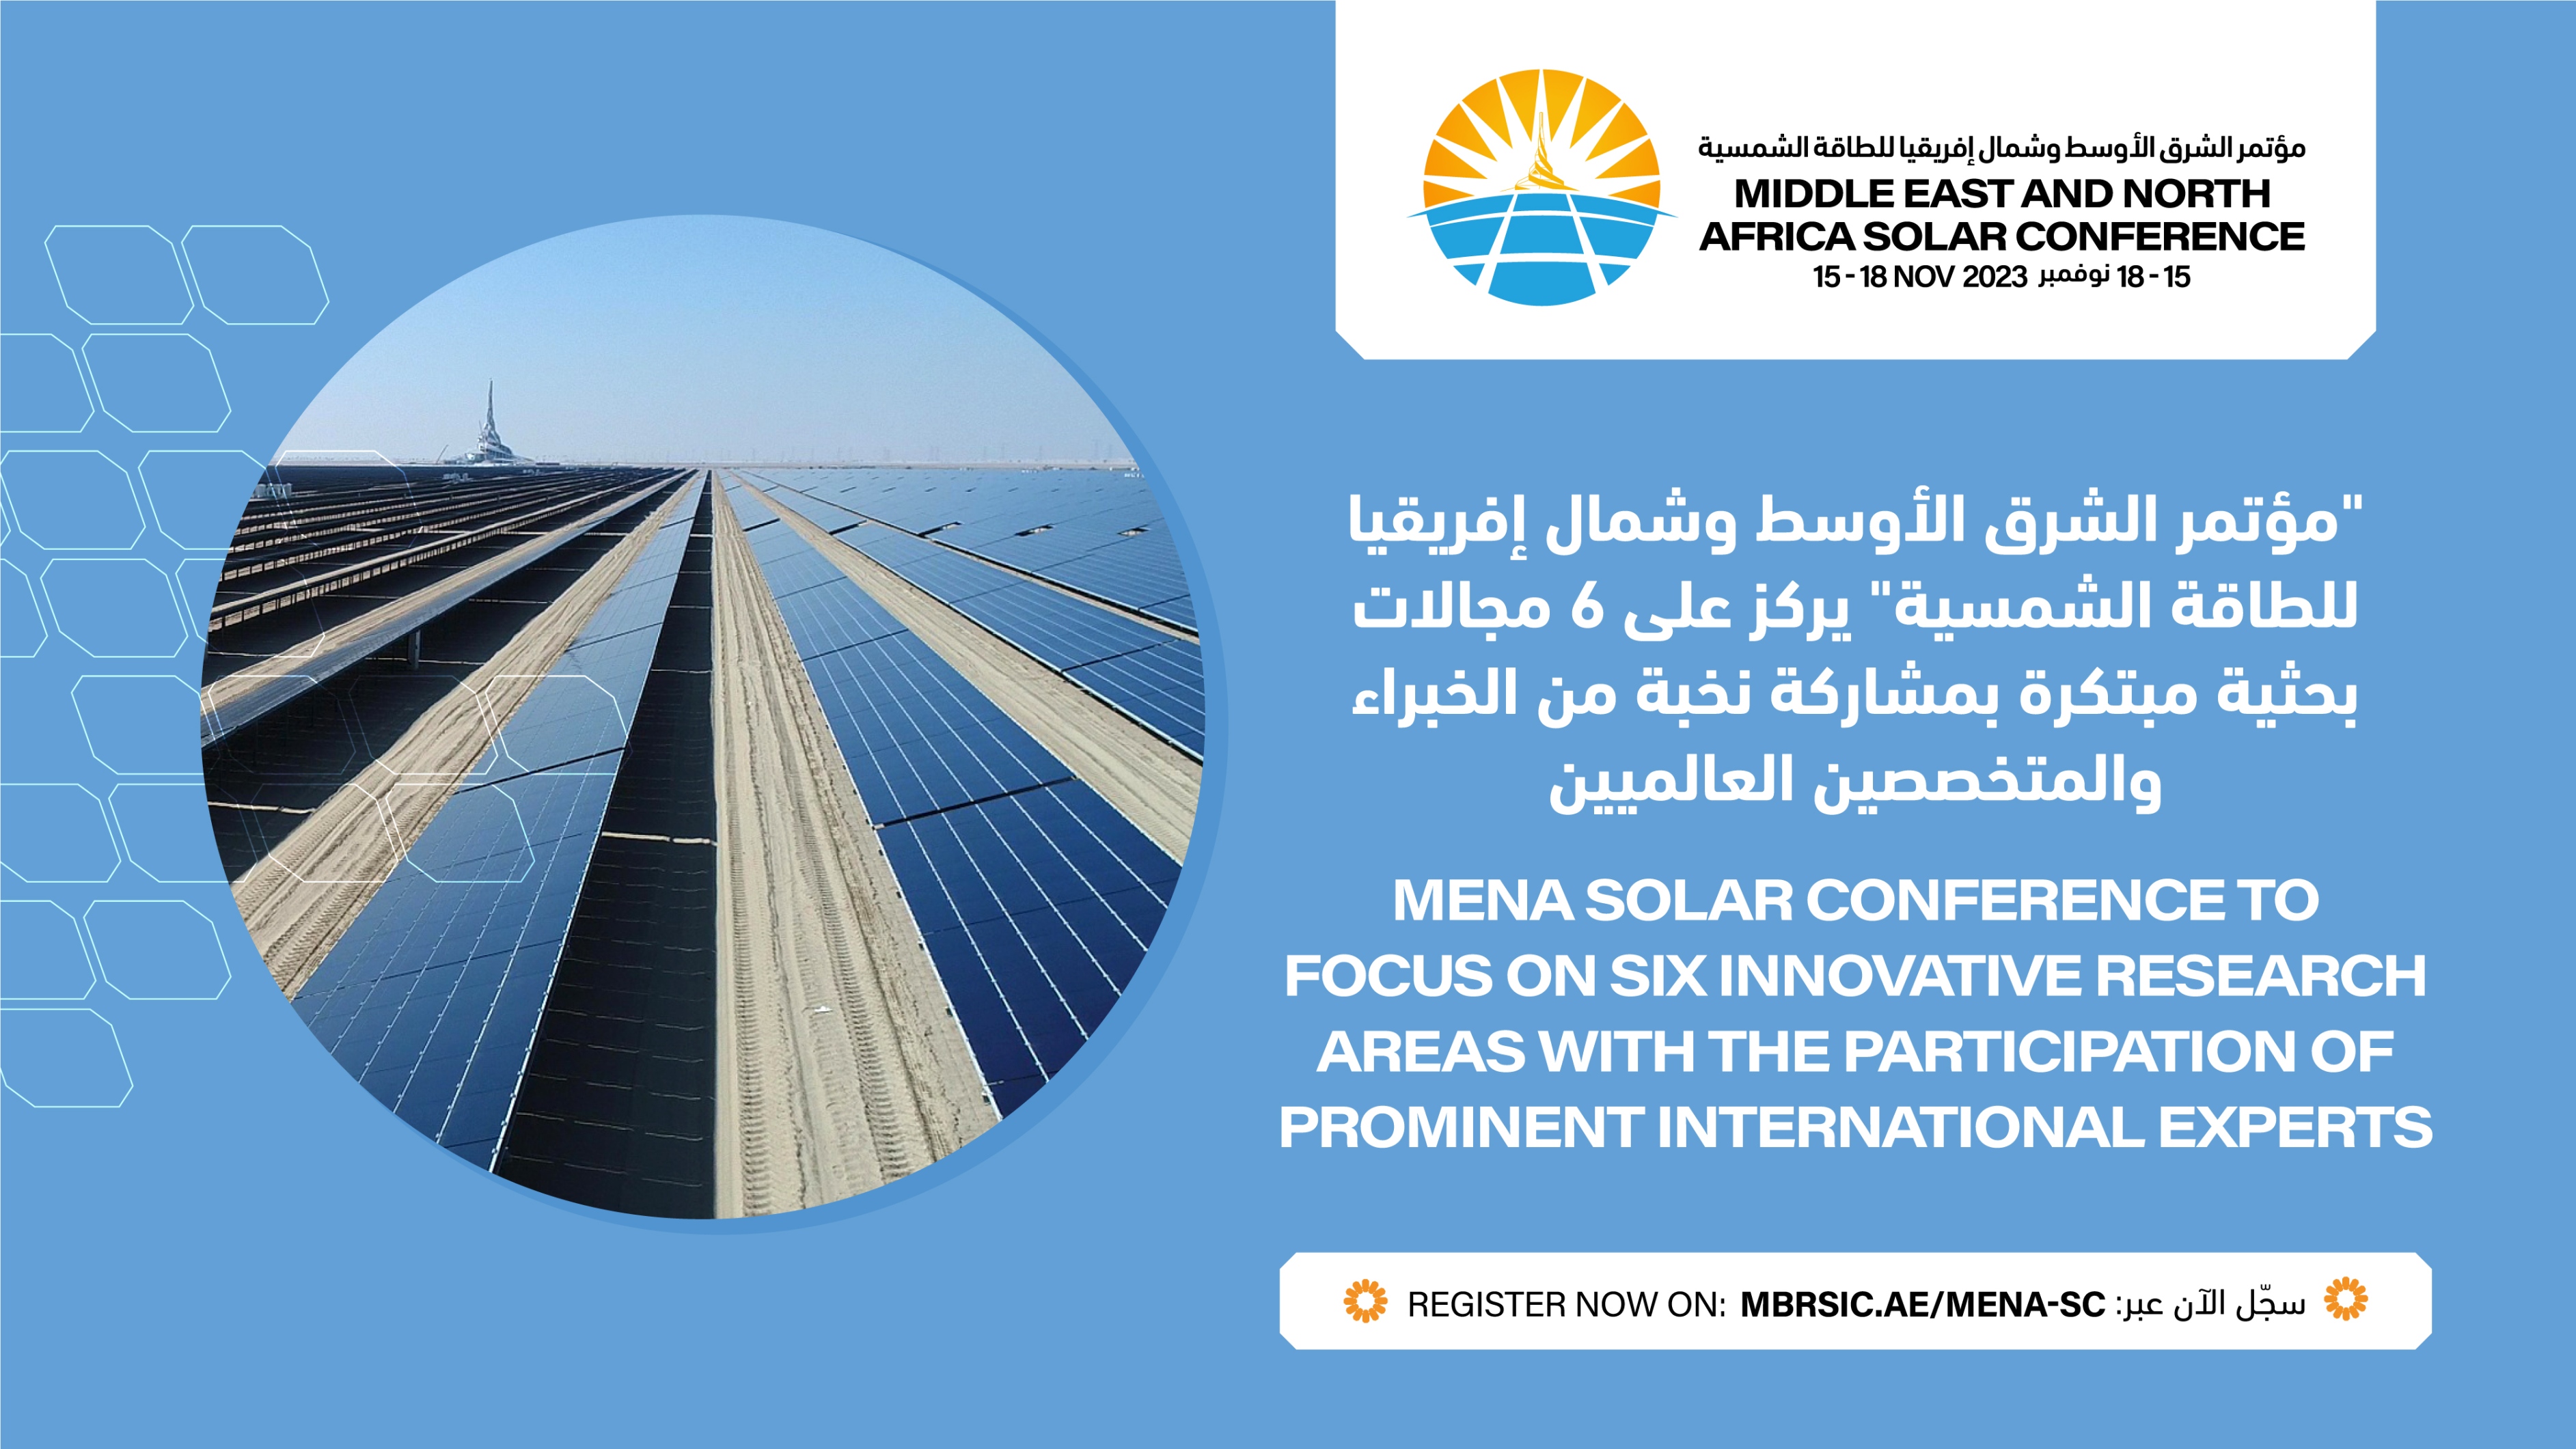 MENA Solar Conference to focus on six innovative research areas with